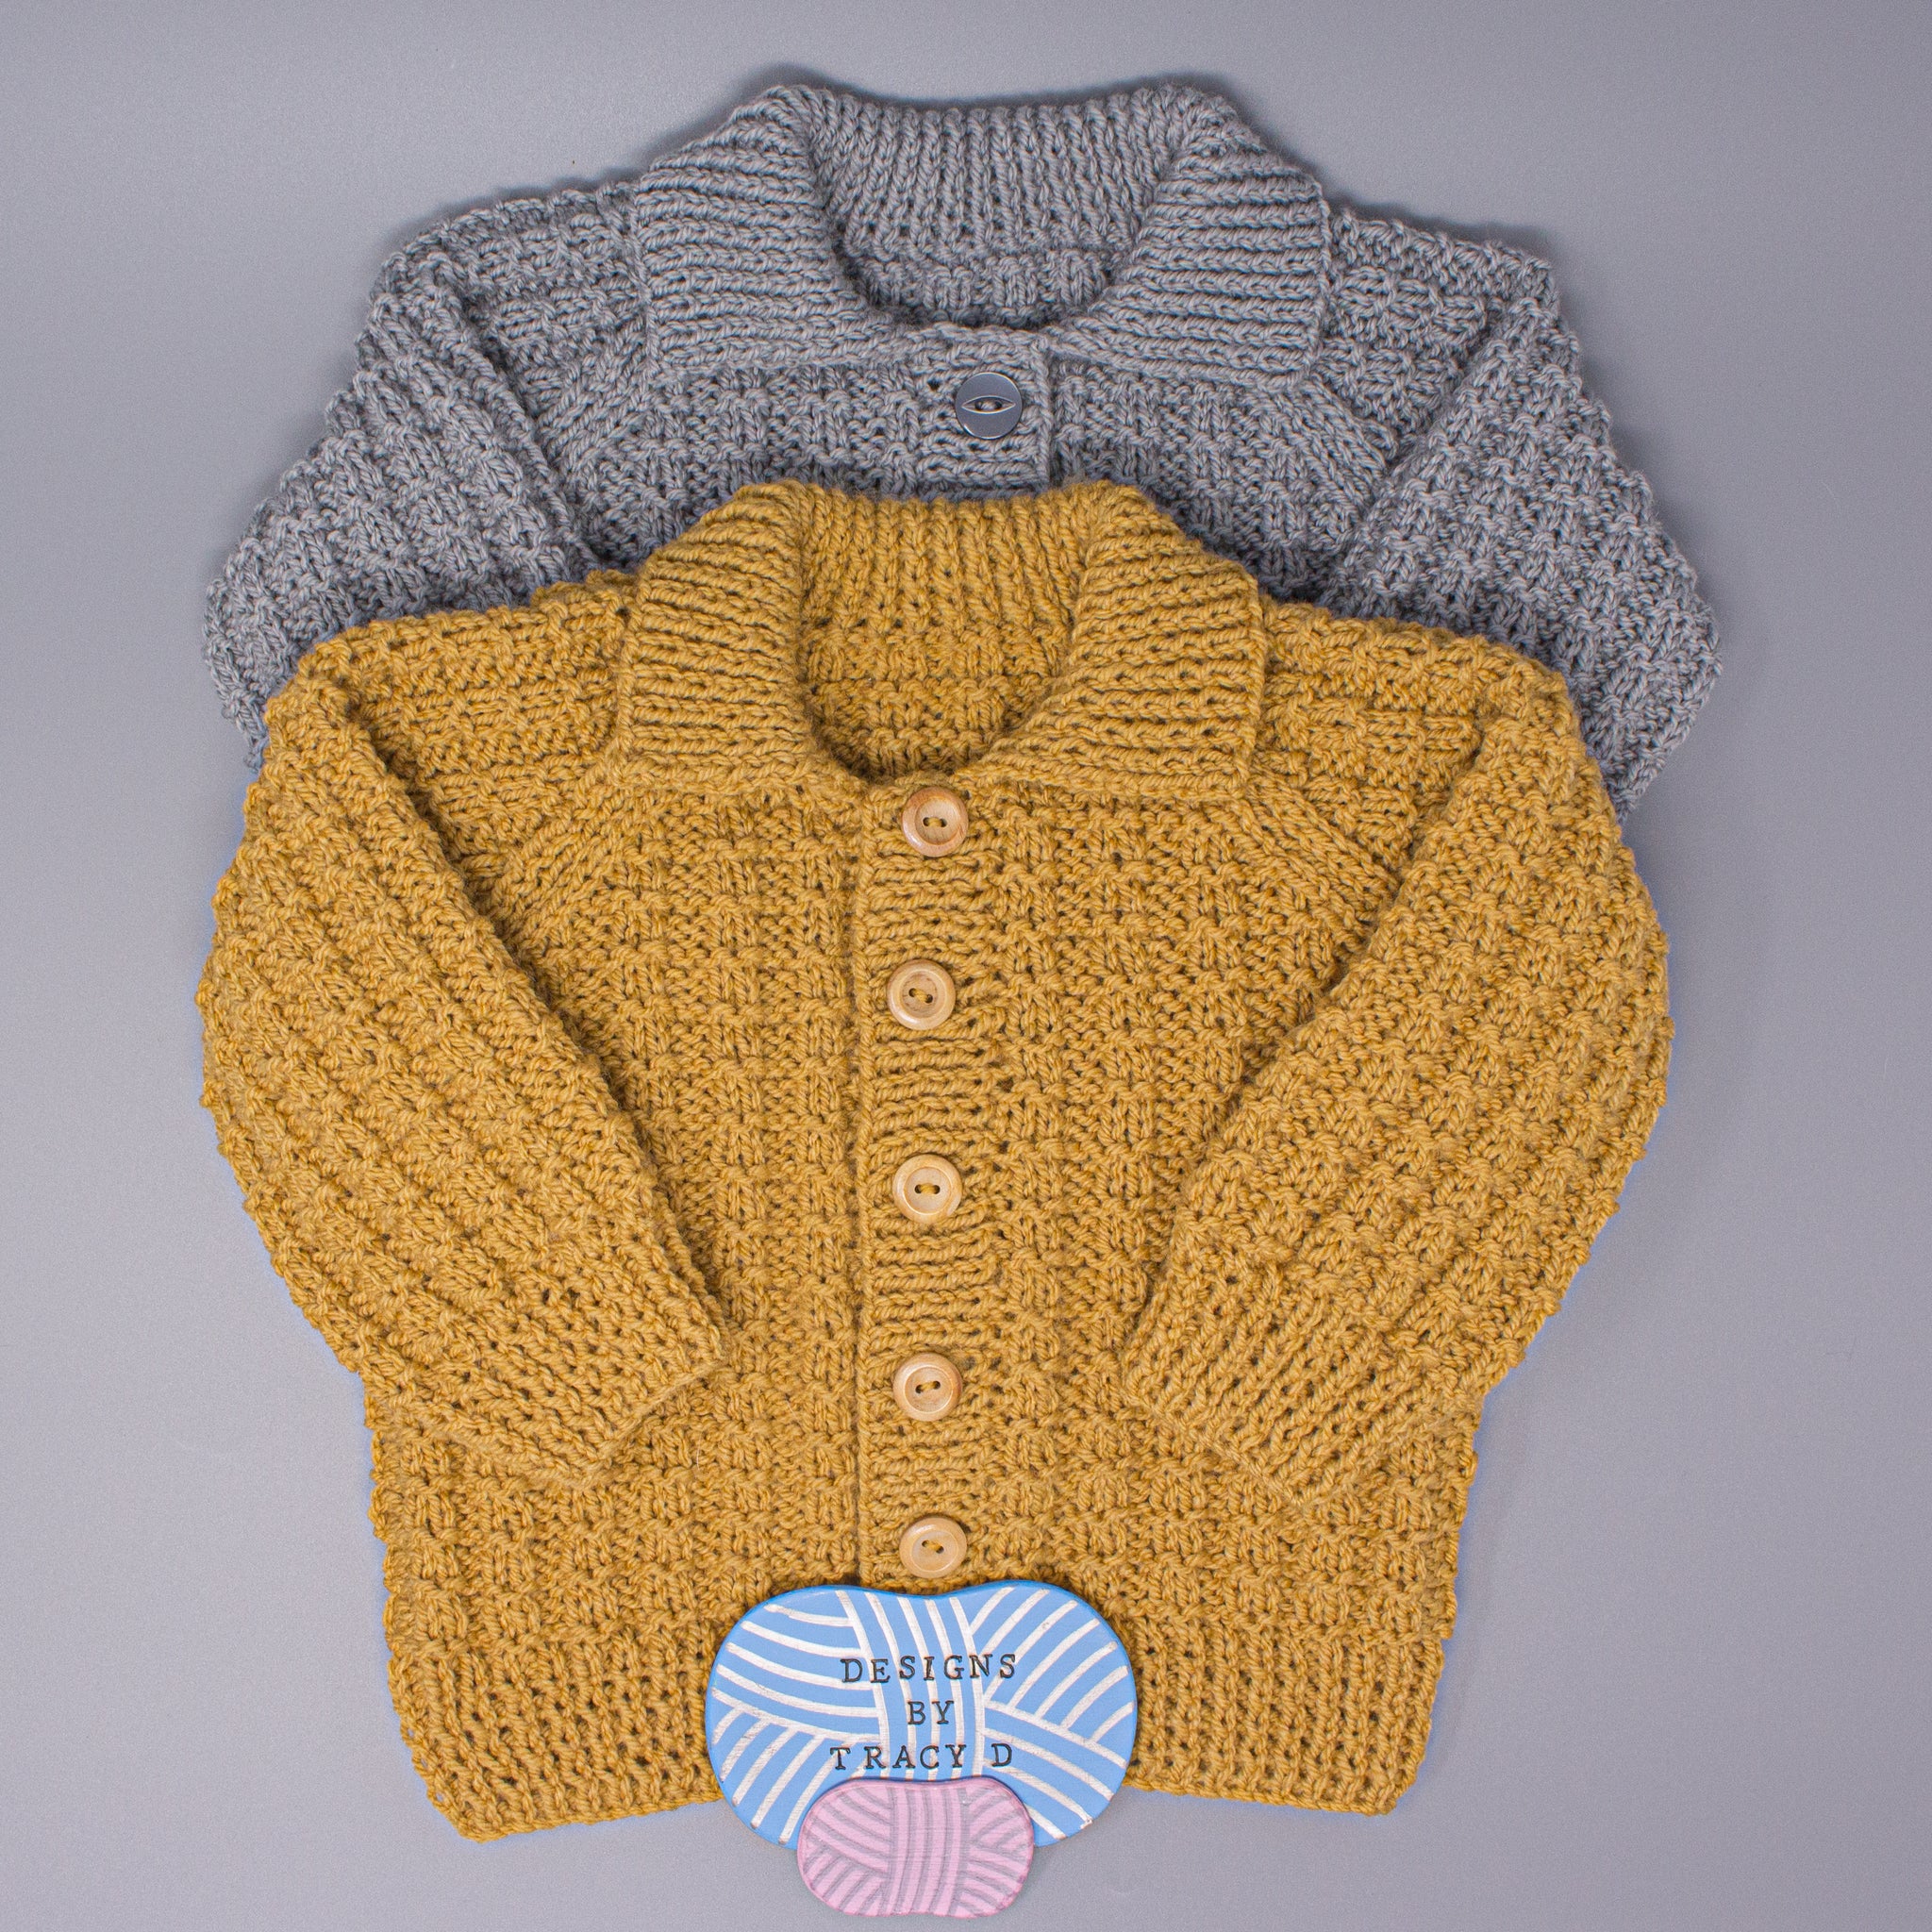 Lewis Unisex Baby Knitting Pattern 2 sizes - Download – Designs By Tracy D